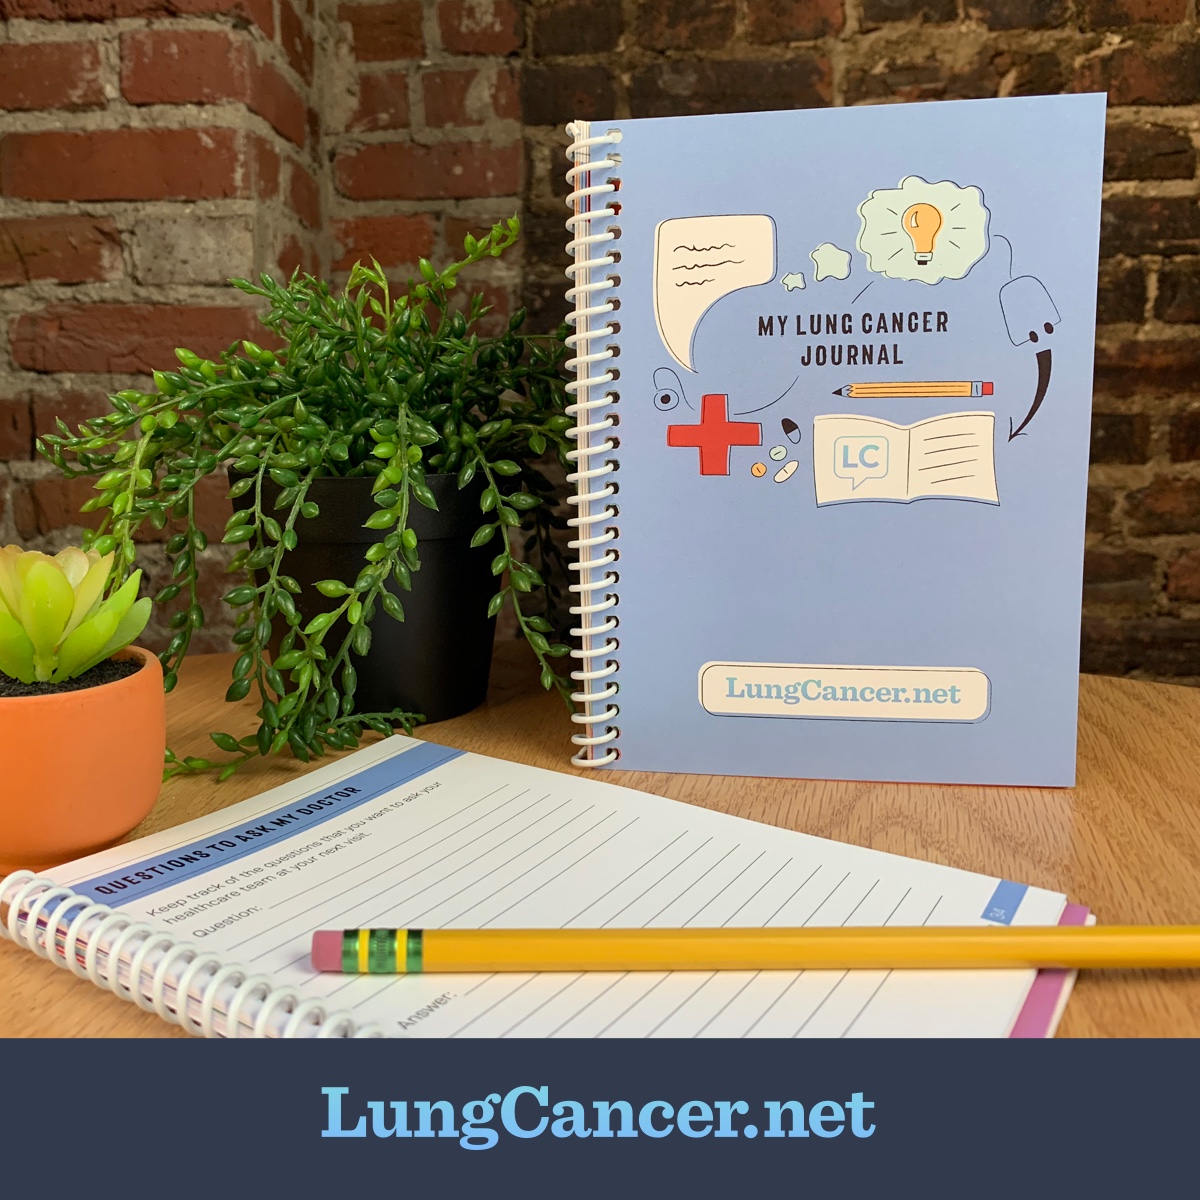 My Lung Cancer Journal